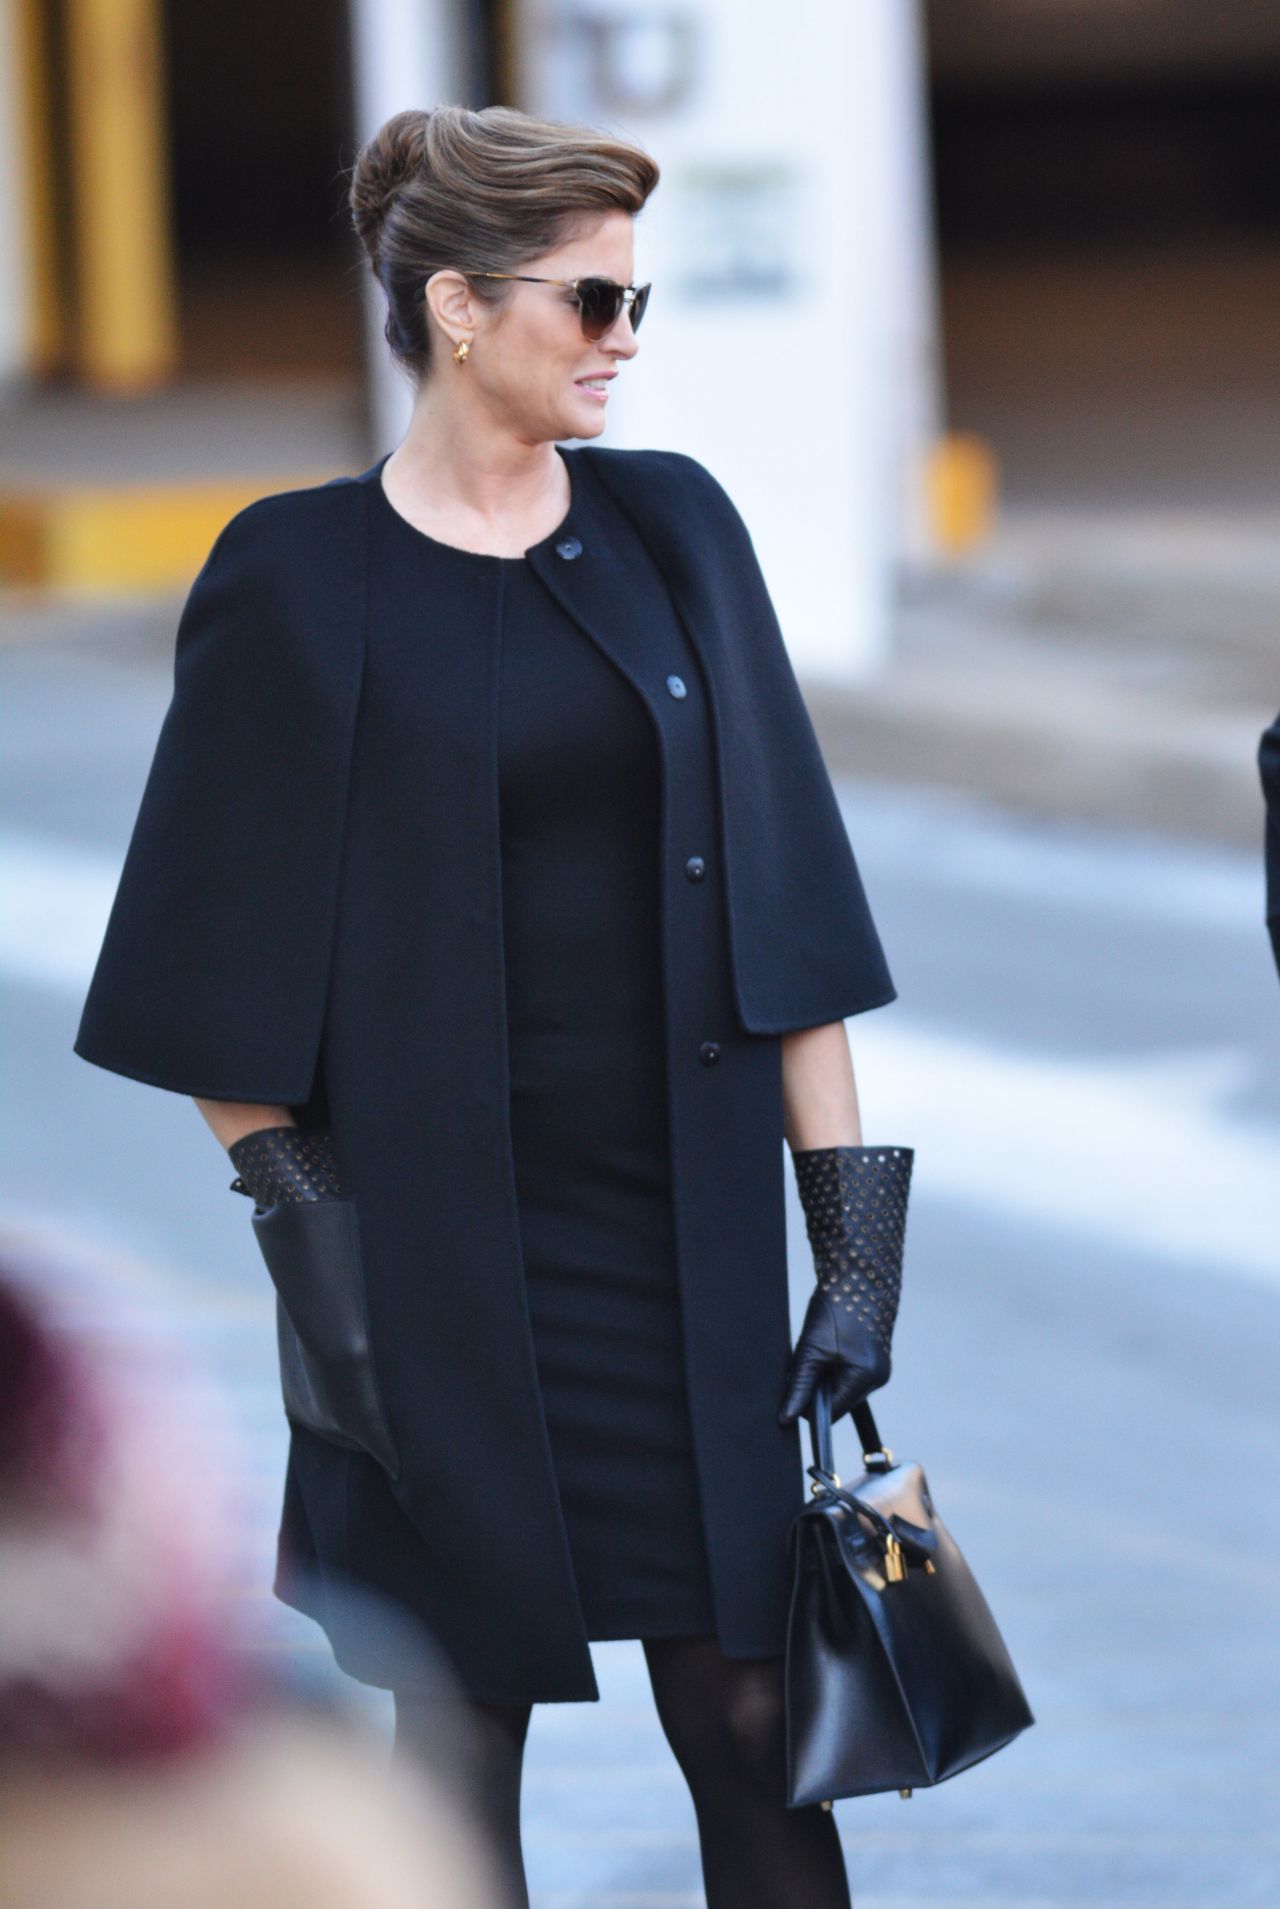 Stephanie Seymour - Arrives to Court in Greenwich, Connecticut 2/2/20161280 x 1909